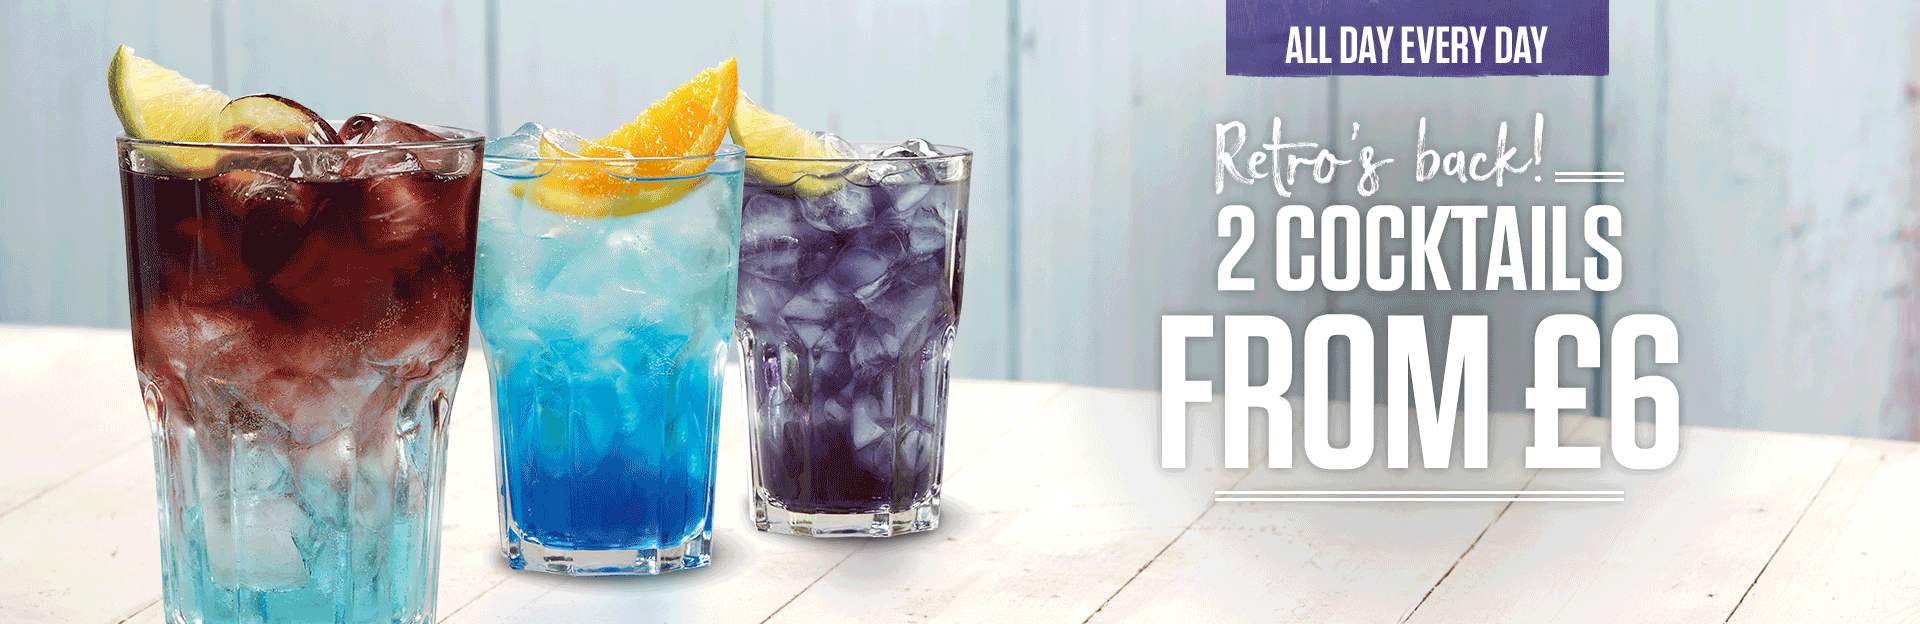 2 cocktails from just £5.50 offer